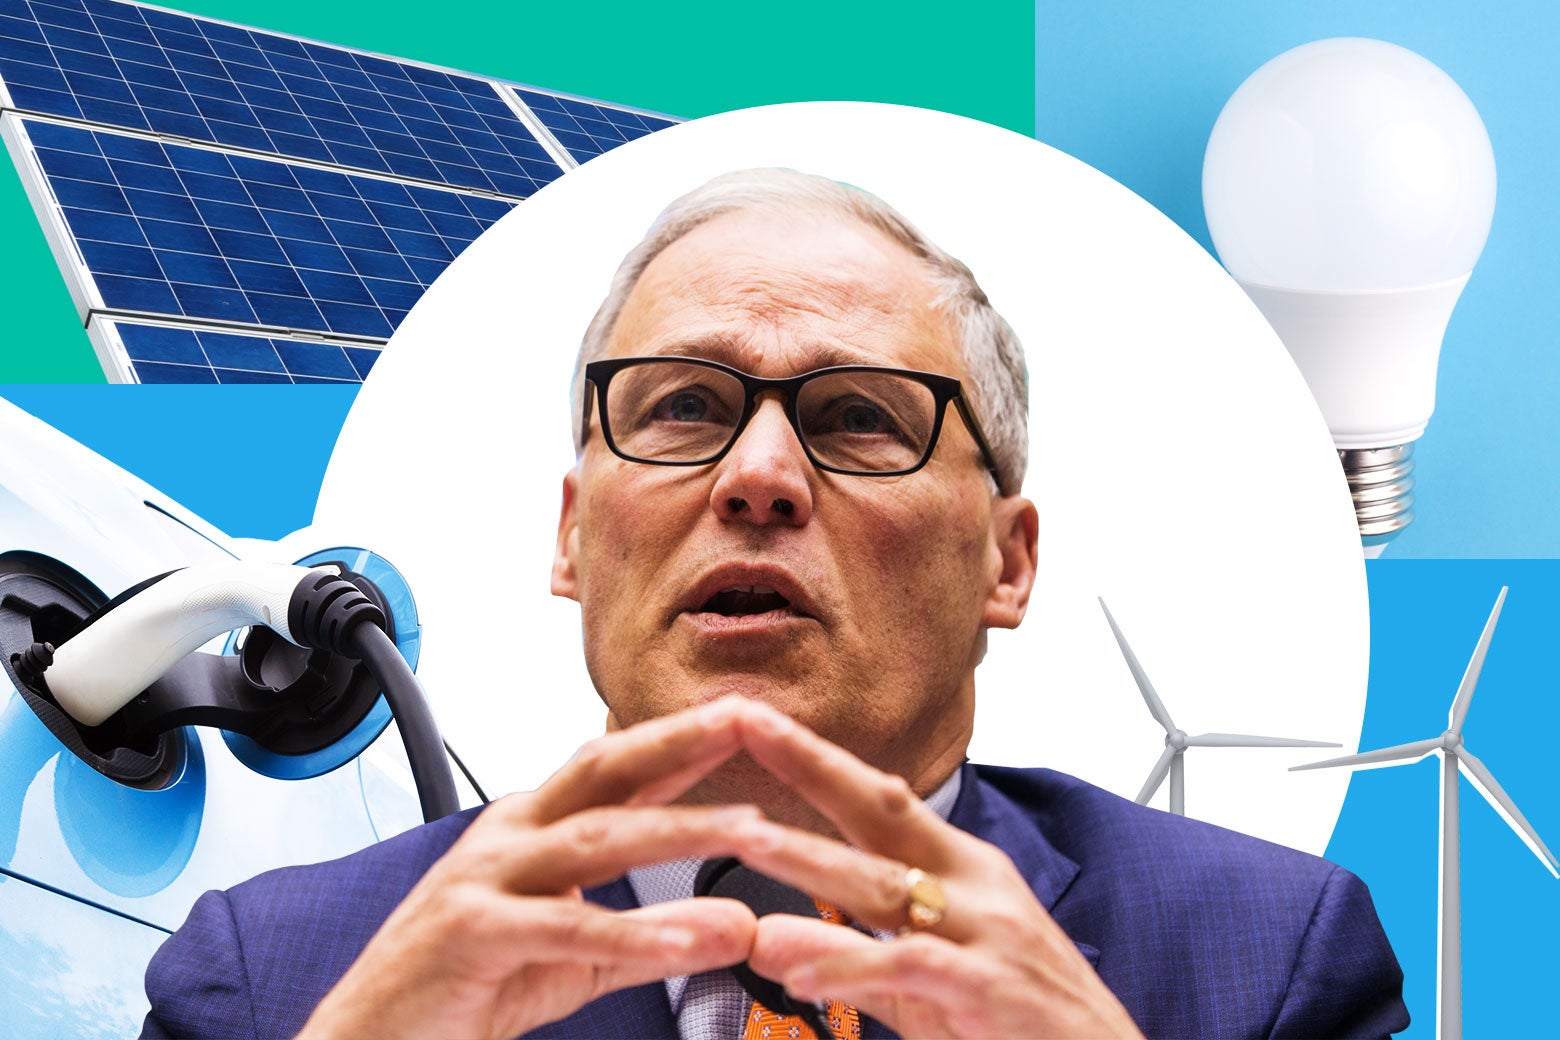 Jay Inslee, surrounded by wind turbines, solar panels, an electric car, and a compact fluorescent lightbulb.